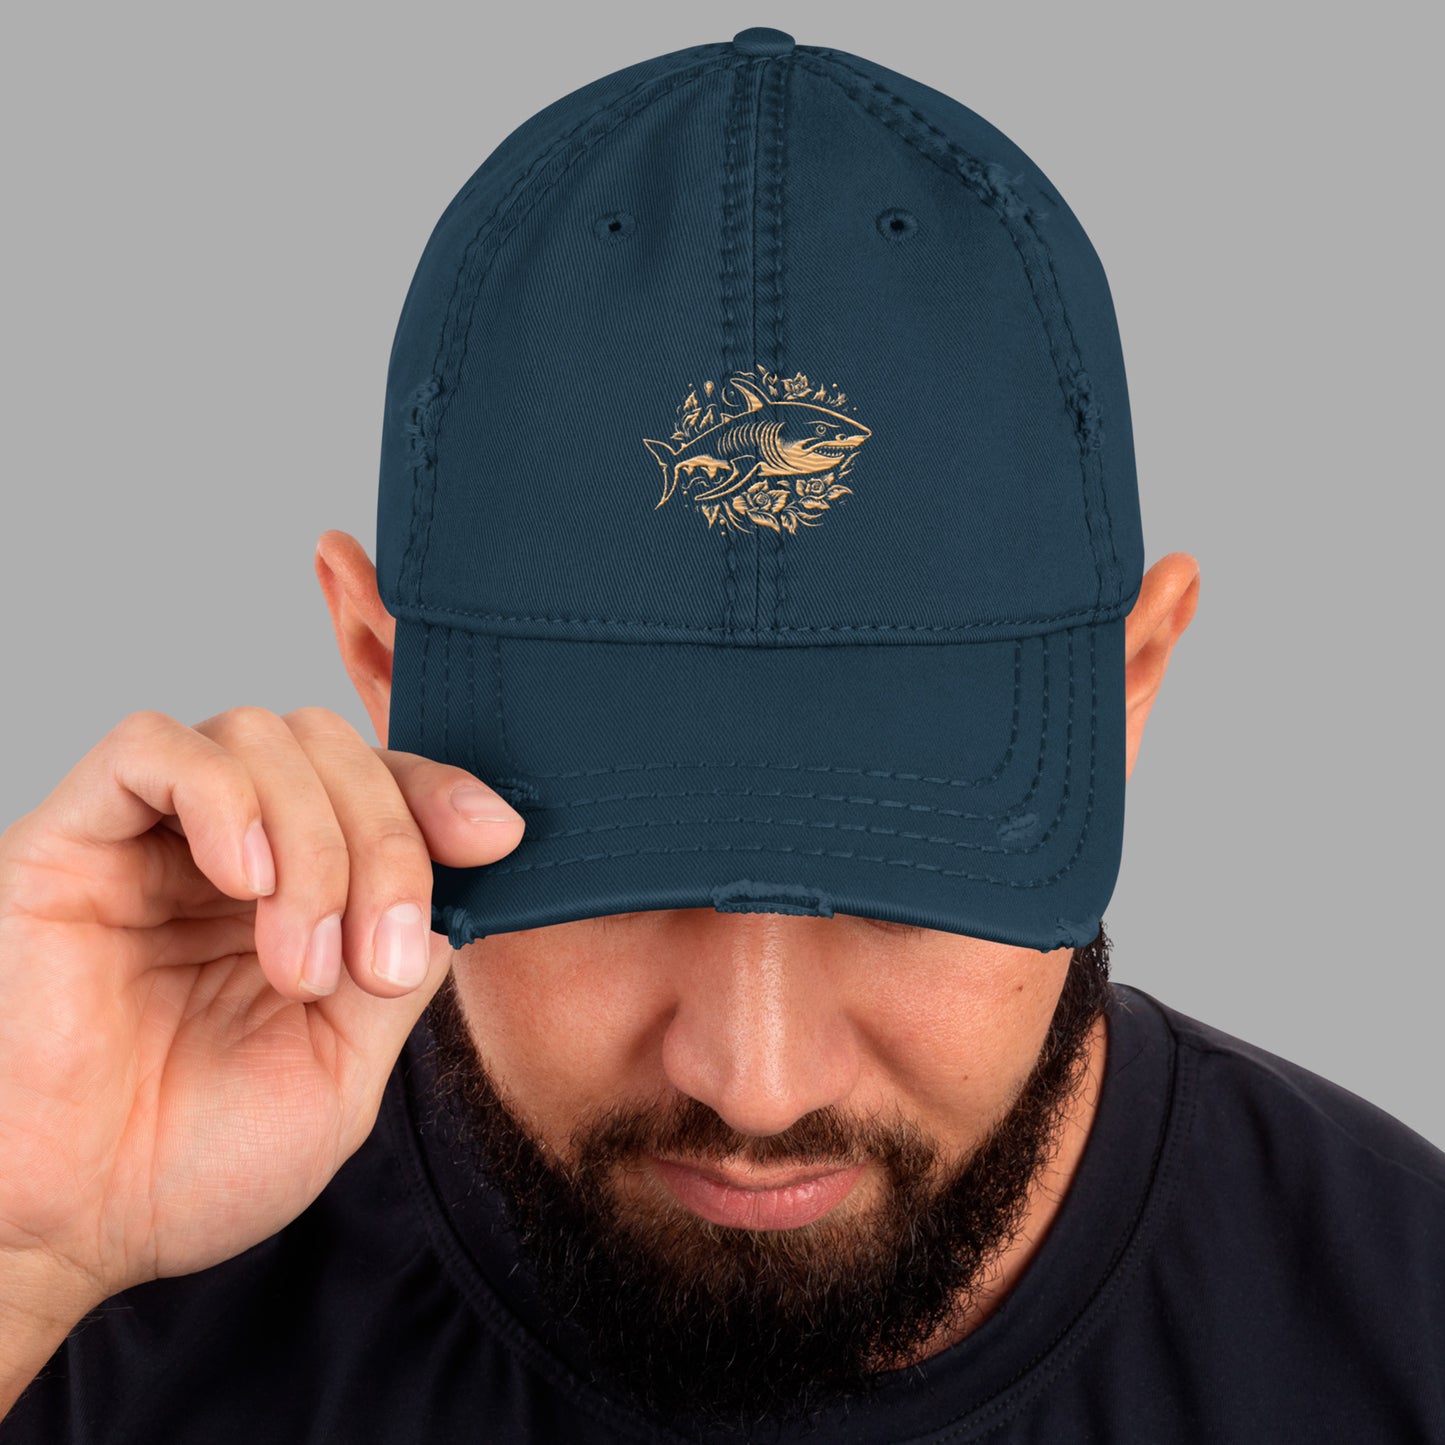 navy Ka Manō Embroidered Distressed Otto Cap worn by model